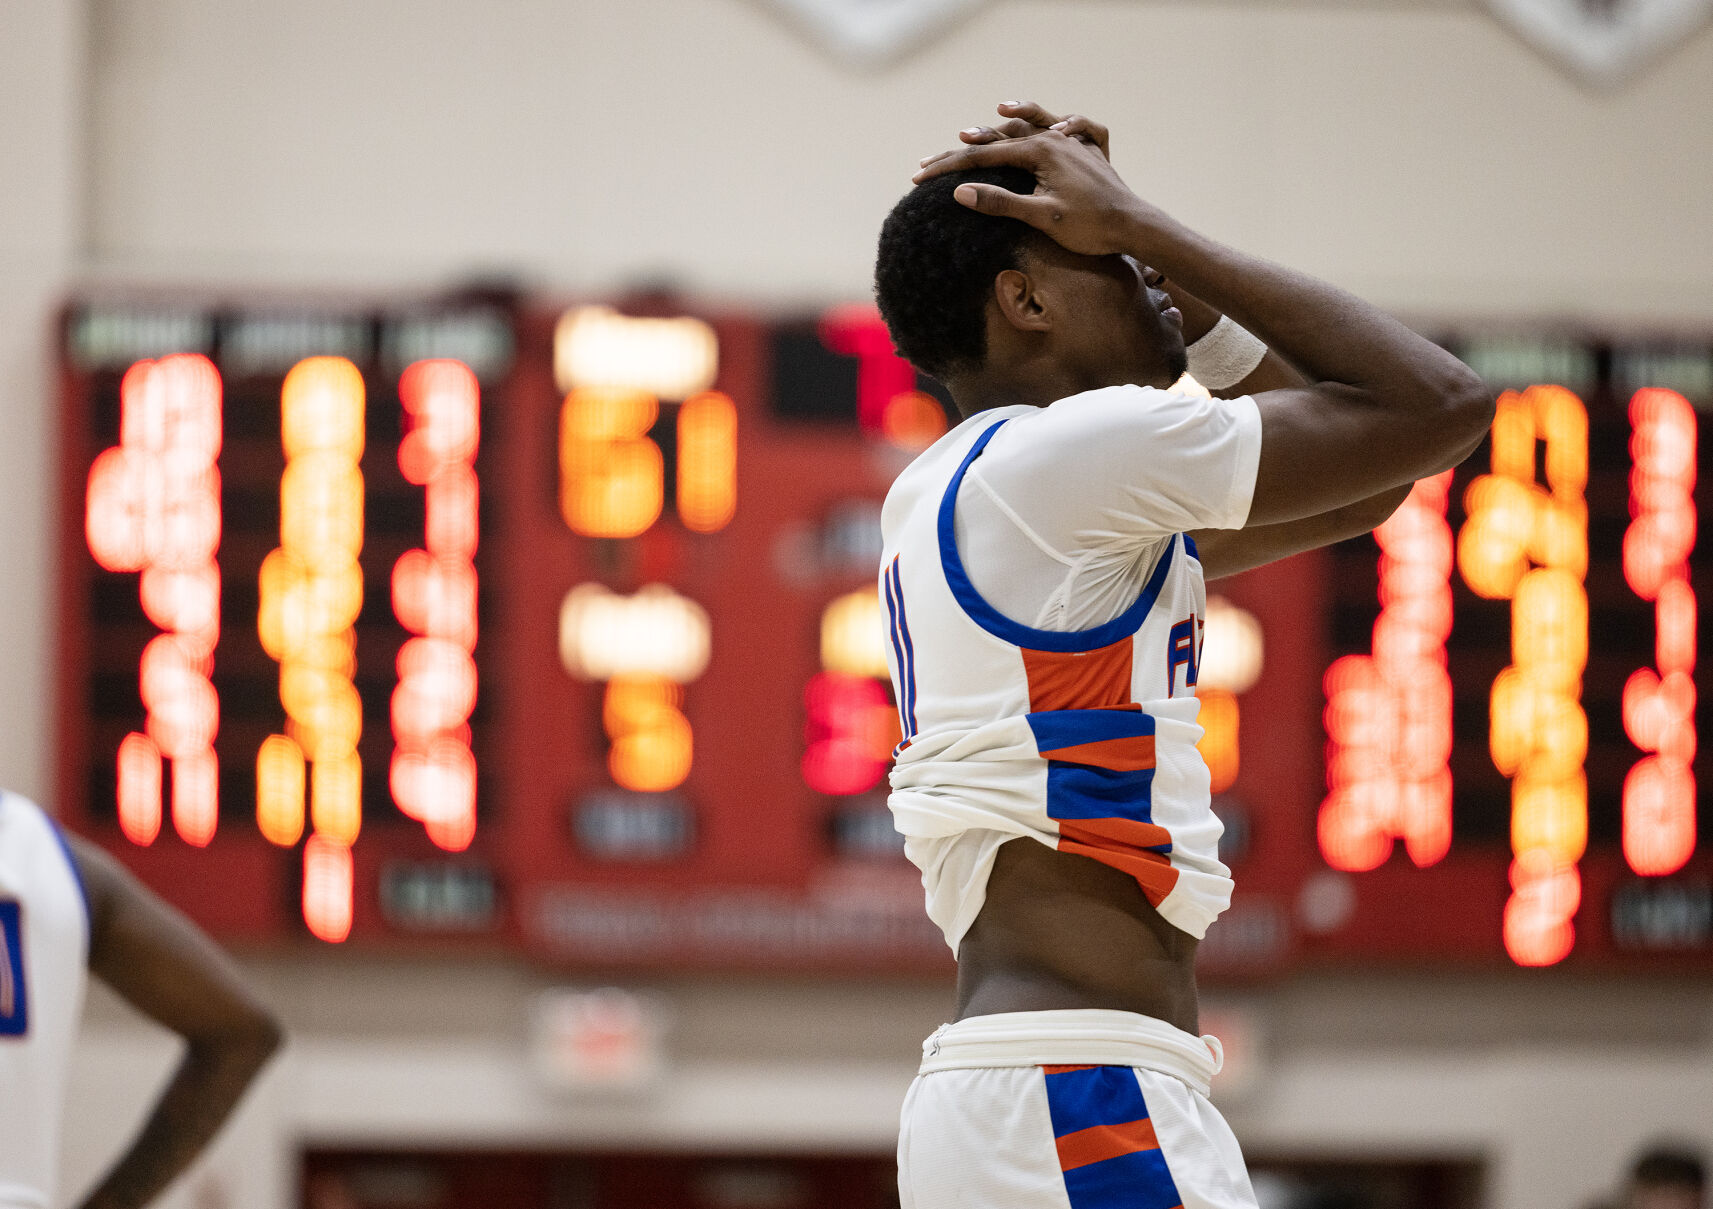 Mount Vernon Defeats East St. Louis in Class 3A Semifinal with Late-game Drama